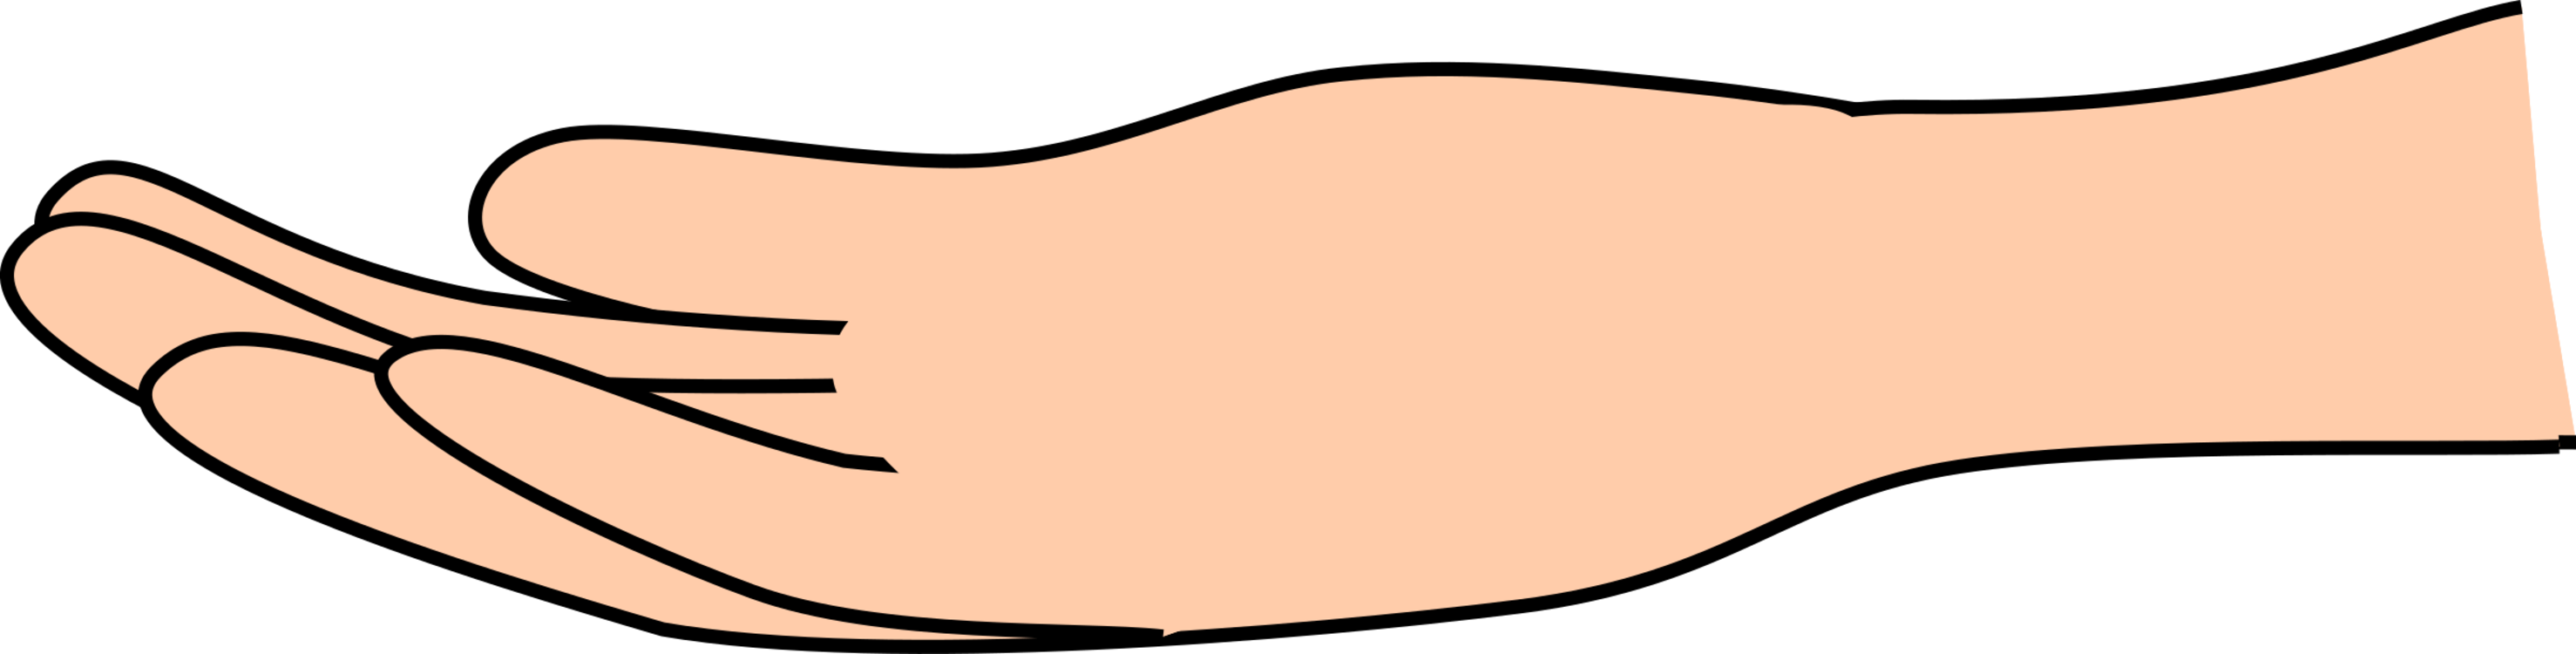 Stomach,Thumb,Area